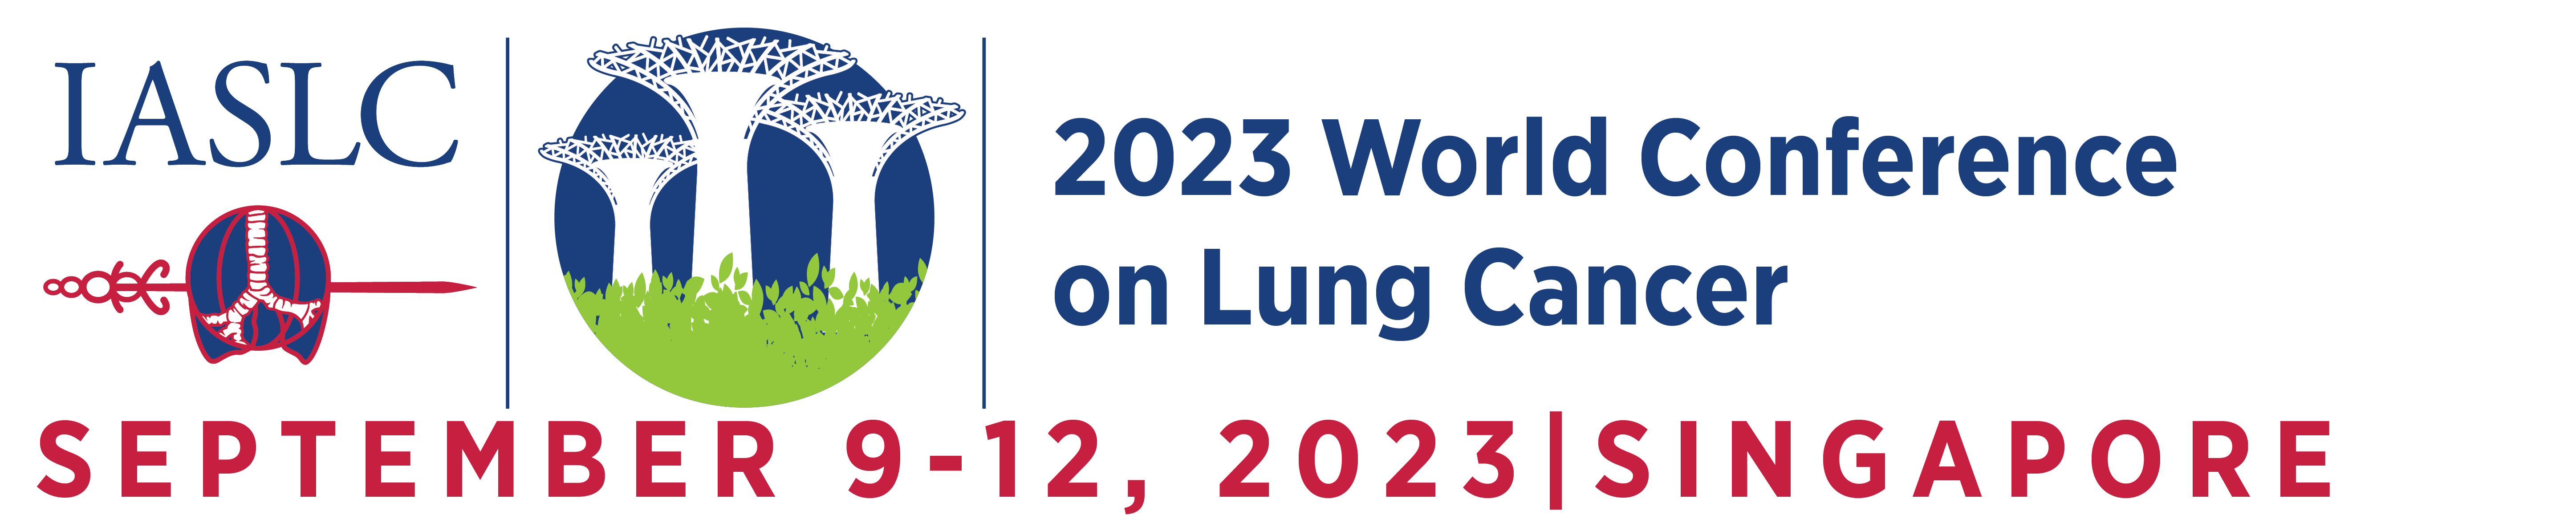 Onsite Information IASLC 2022 WCLC World Conference on Lung Cancer